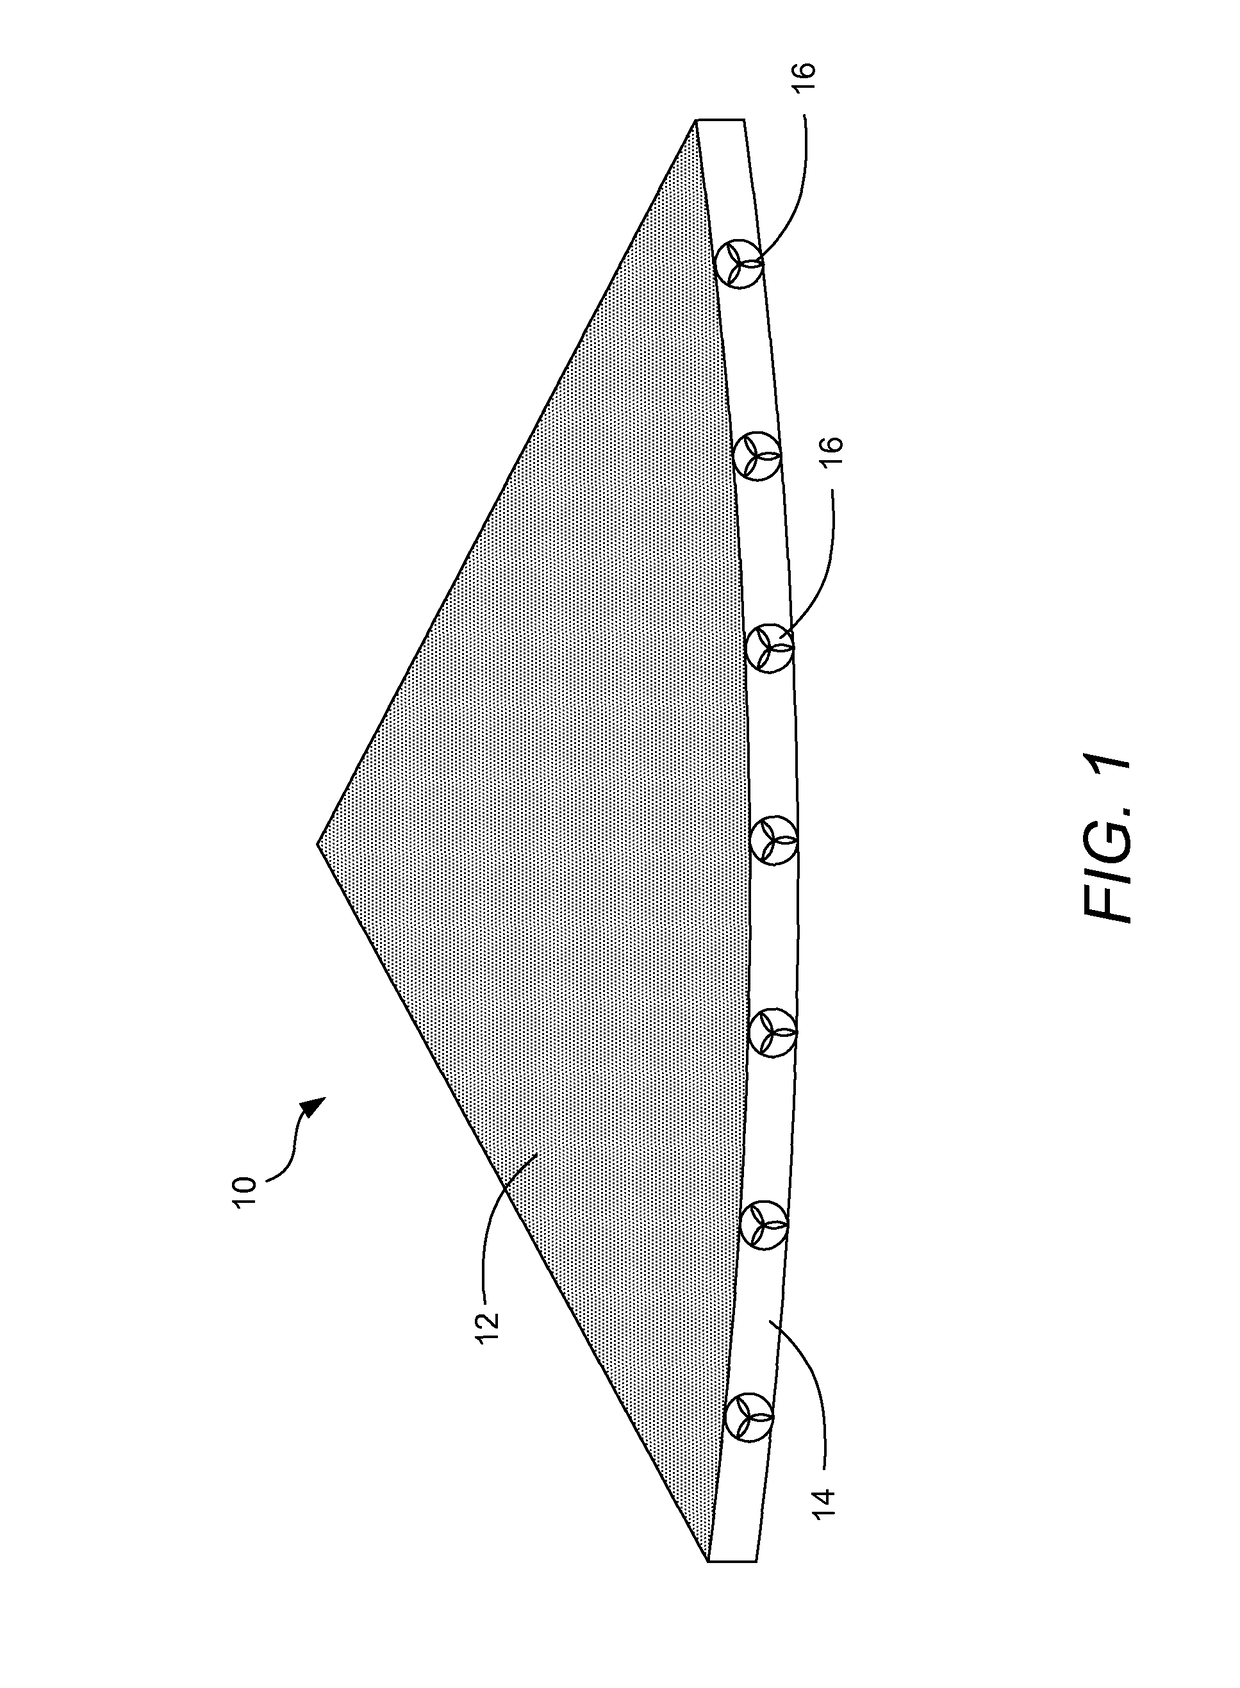 Systems and methods for ozone treatment of grain in grain piles